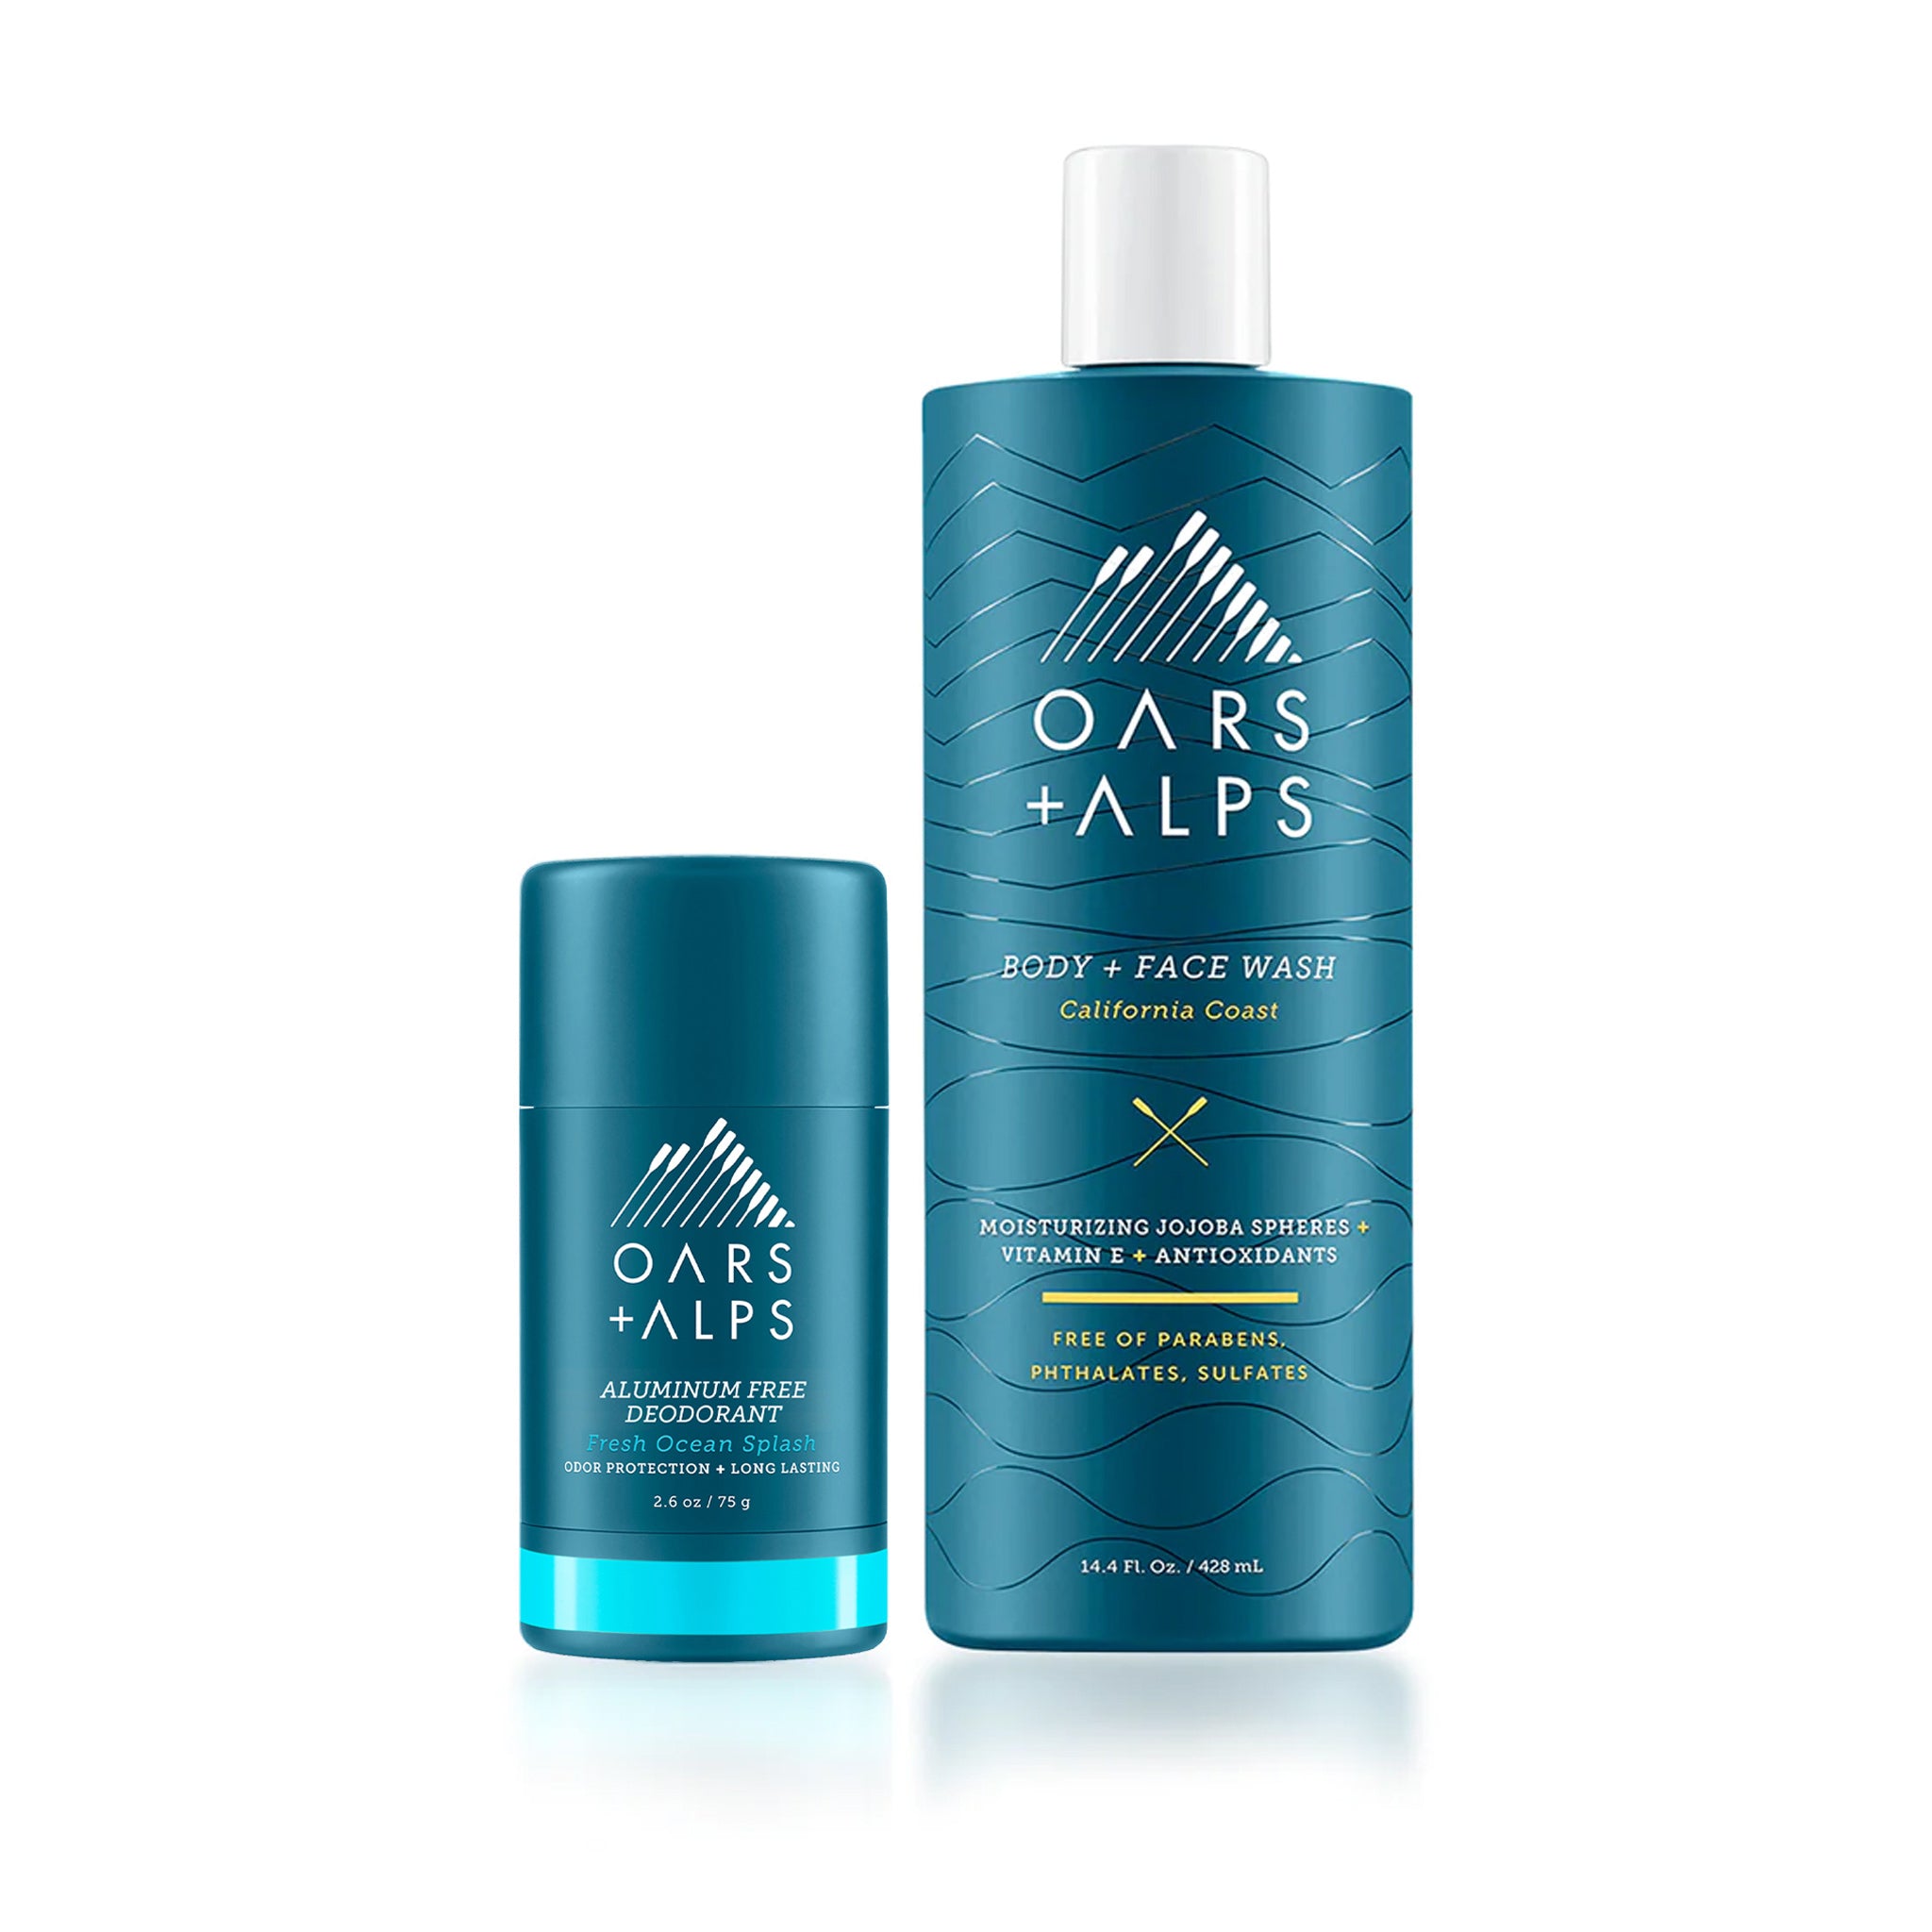 men's deodorant and a 2-in-1 face and body wash 